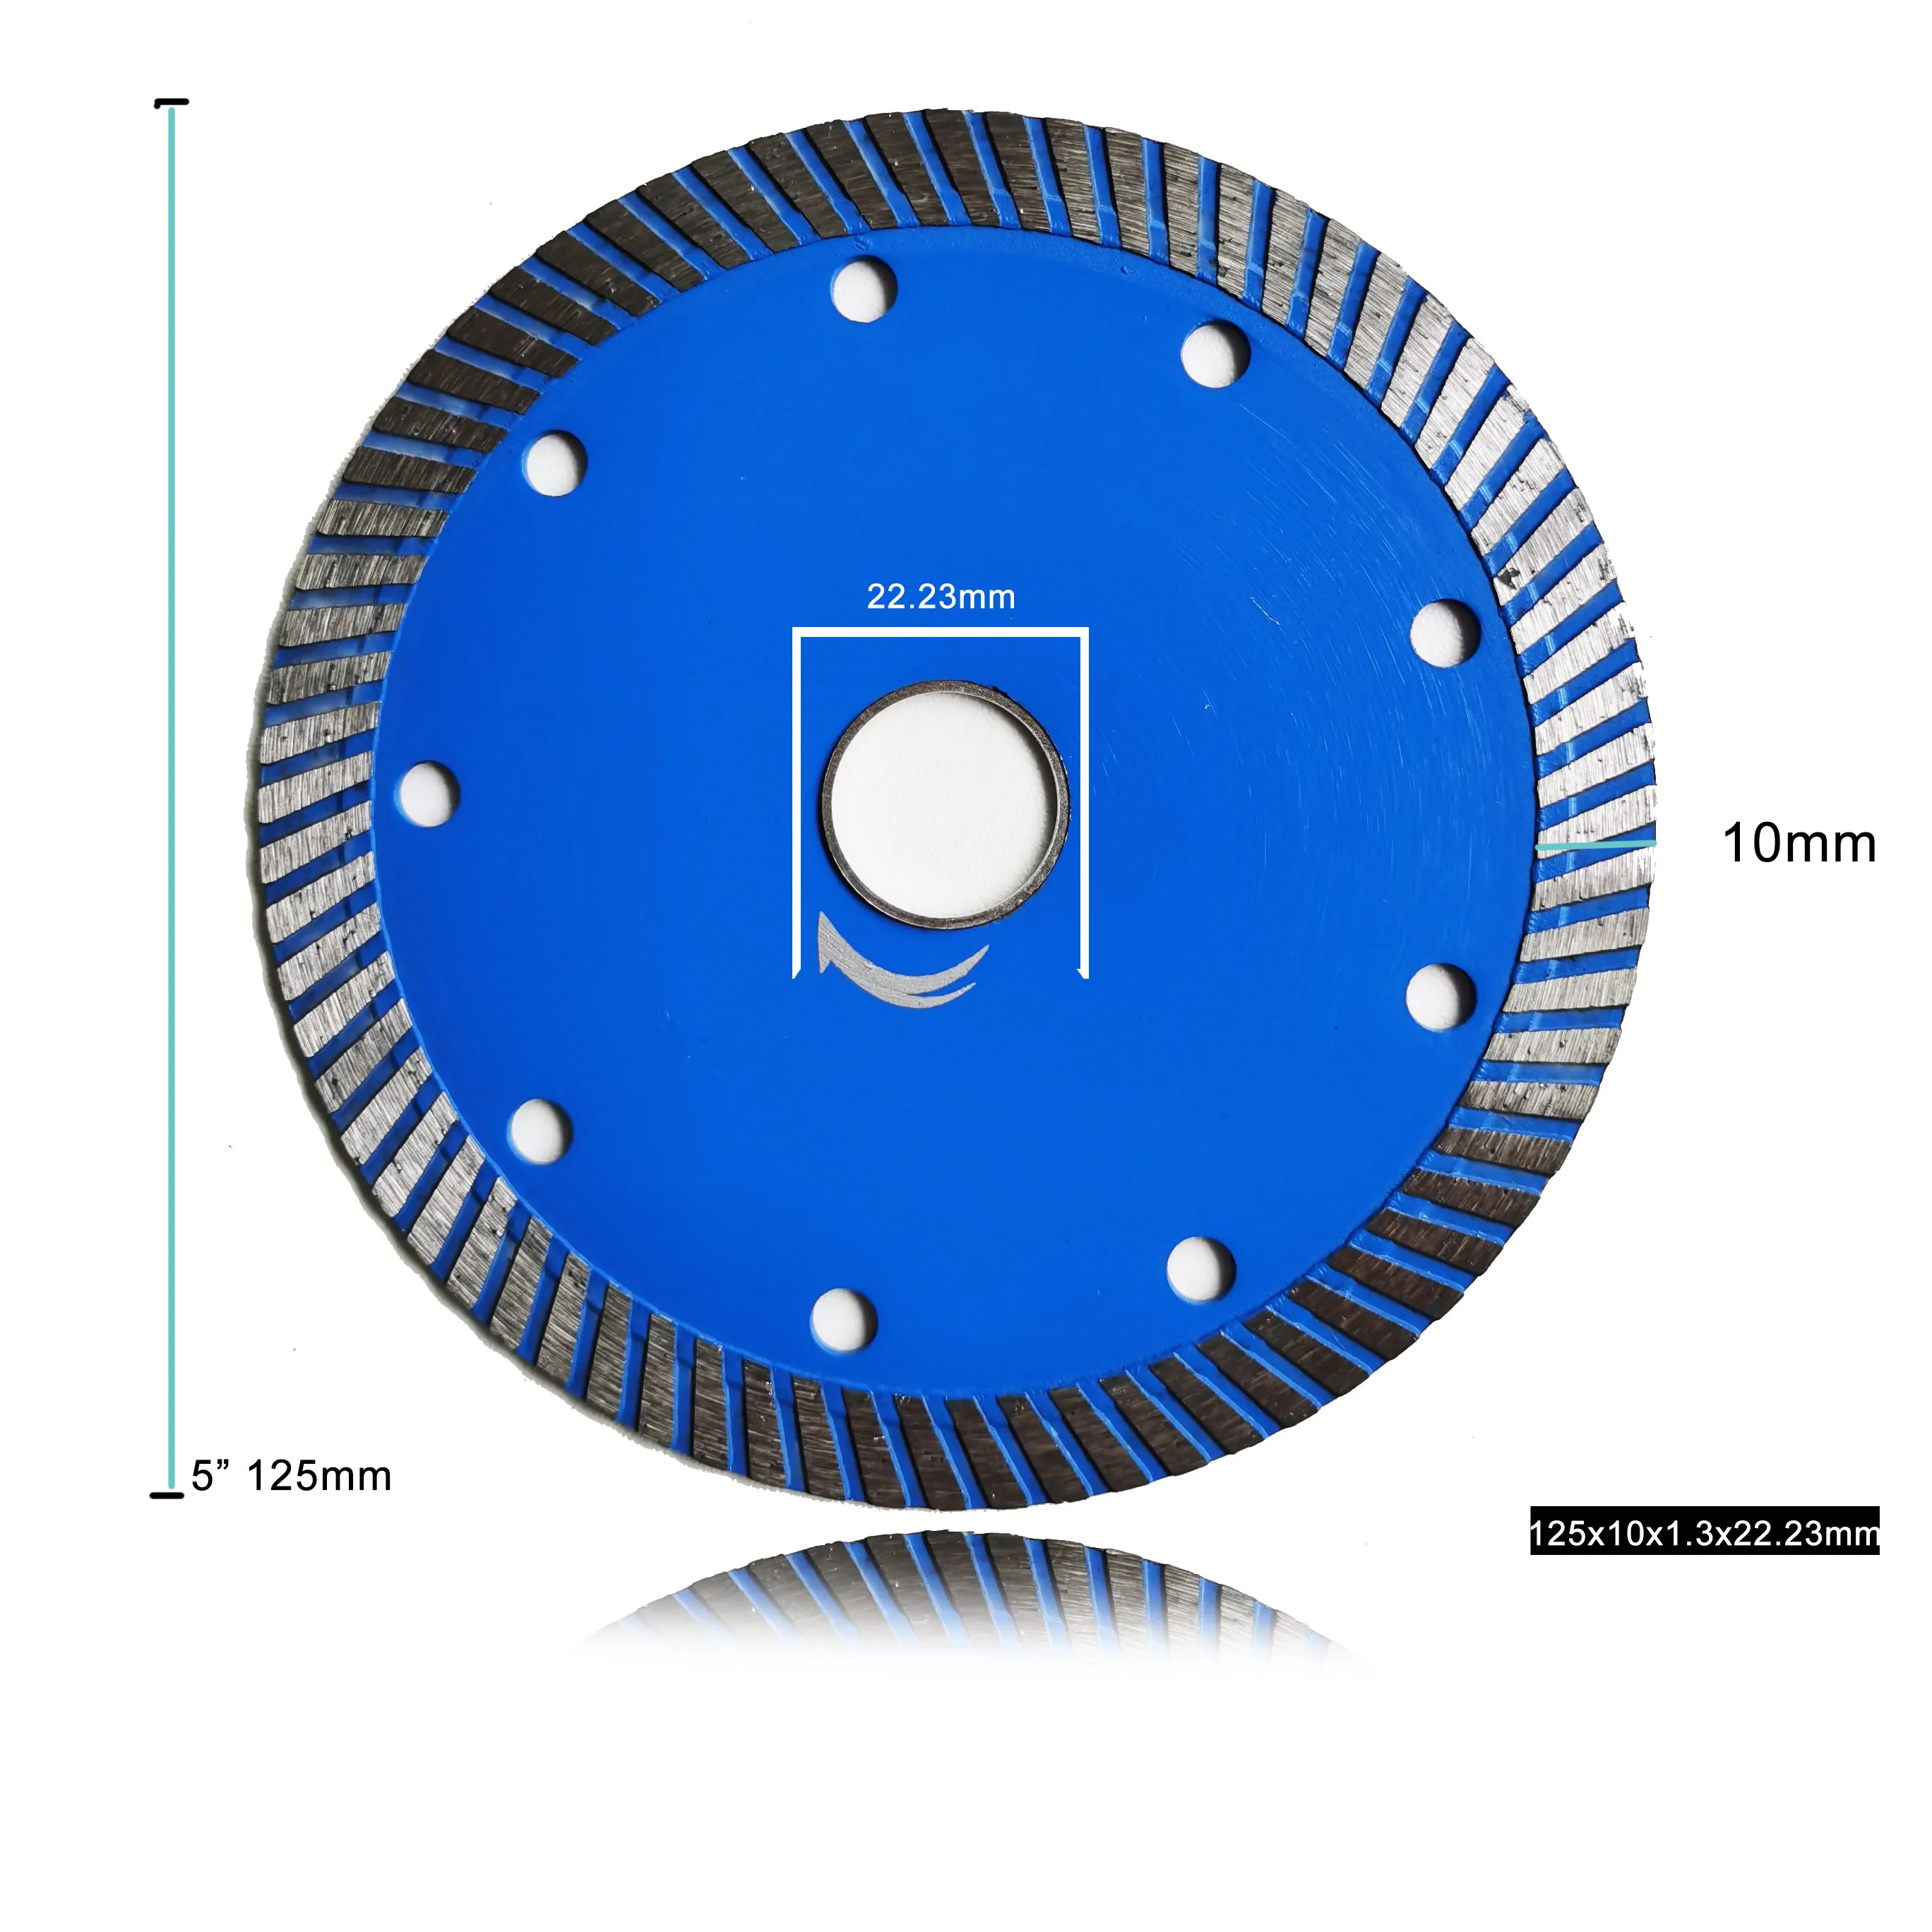 

125mm diamond blade china circular saw blade ceramic tile cutter diamond saw blade diamond cutting disc for marble and granite